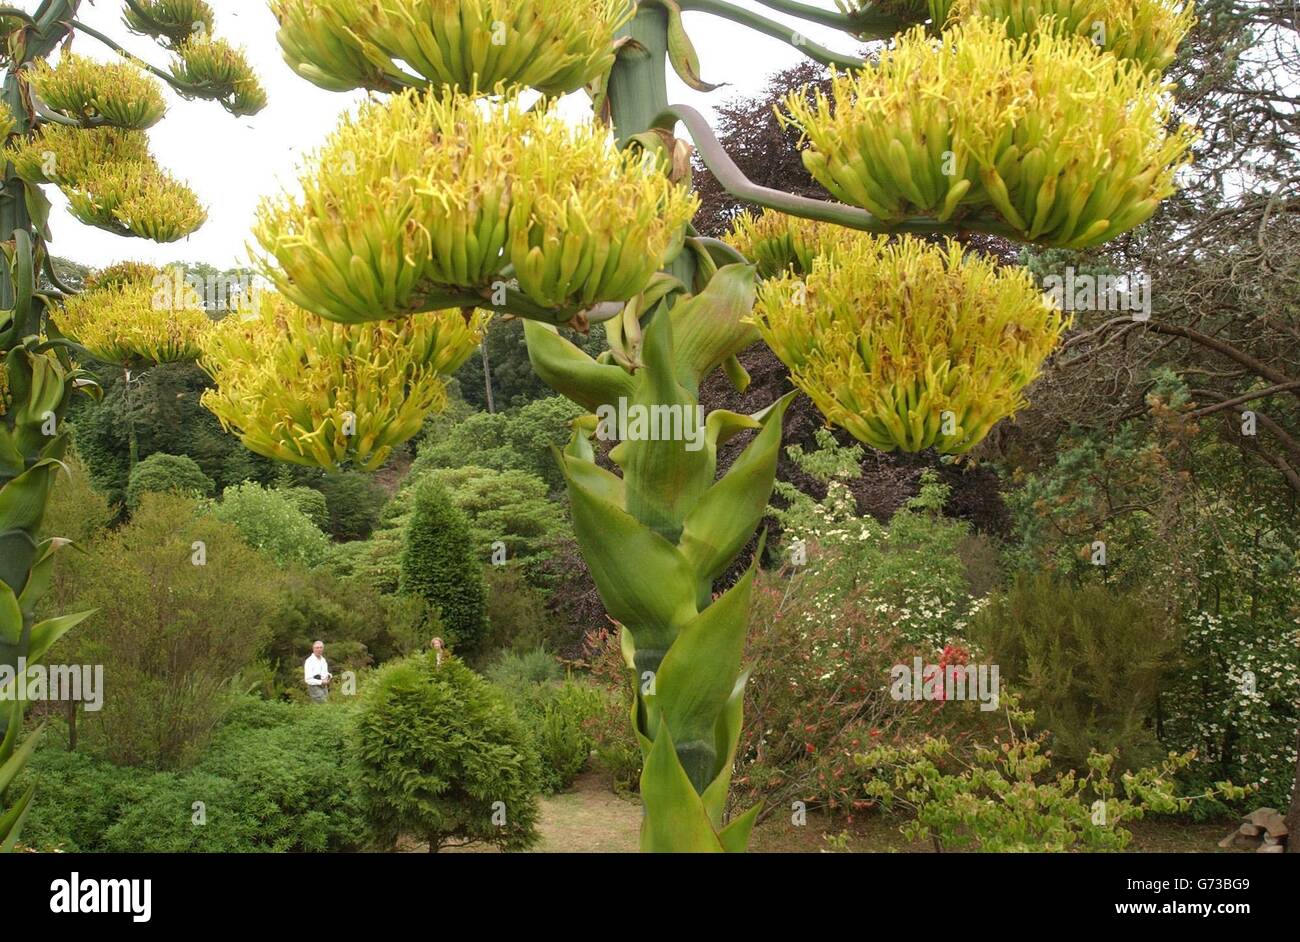 Rare blooms, on two giant agave plants - commonly known as 'century plants' for the age that they can reach before they flower - which have flowered for the first time in nearly 30 years at the National Trust's Glendurgan Gardens in Cornwall. The plants, which are nearly 30-foot-high and are native to Mexico and parts of America, are in what is usually a private area of the 26-acre, 19th century garden but proving so popular that a special enclosure has been provided for people to get close to them.They are thought to have grown from seed from the last agave which flowered back in 1976. Stock Photo